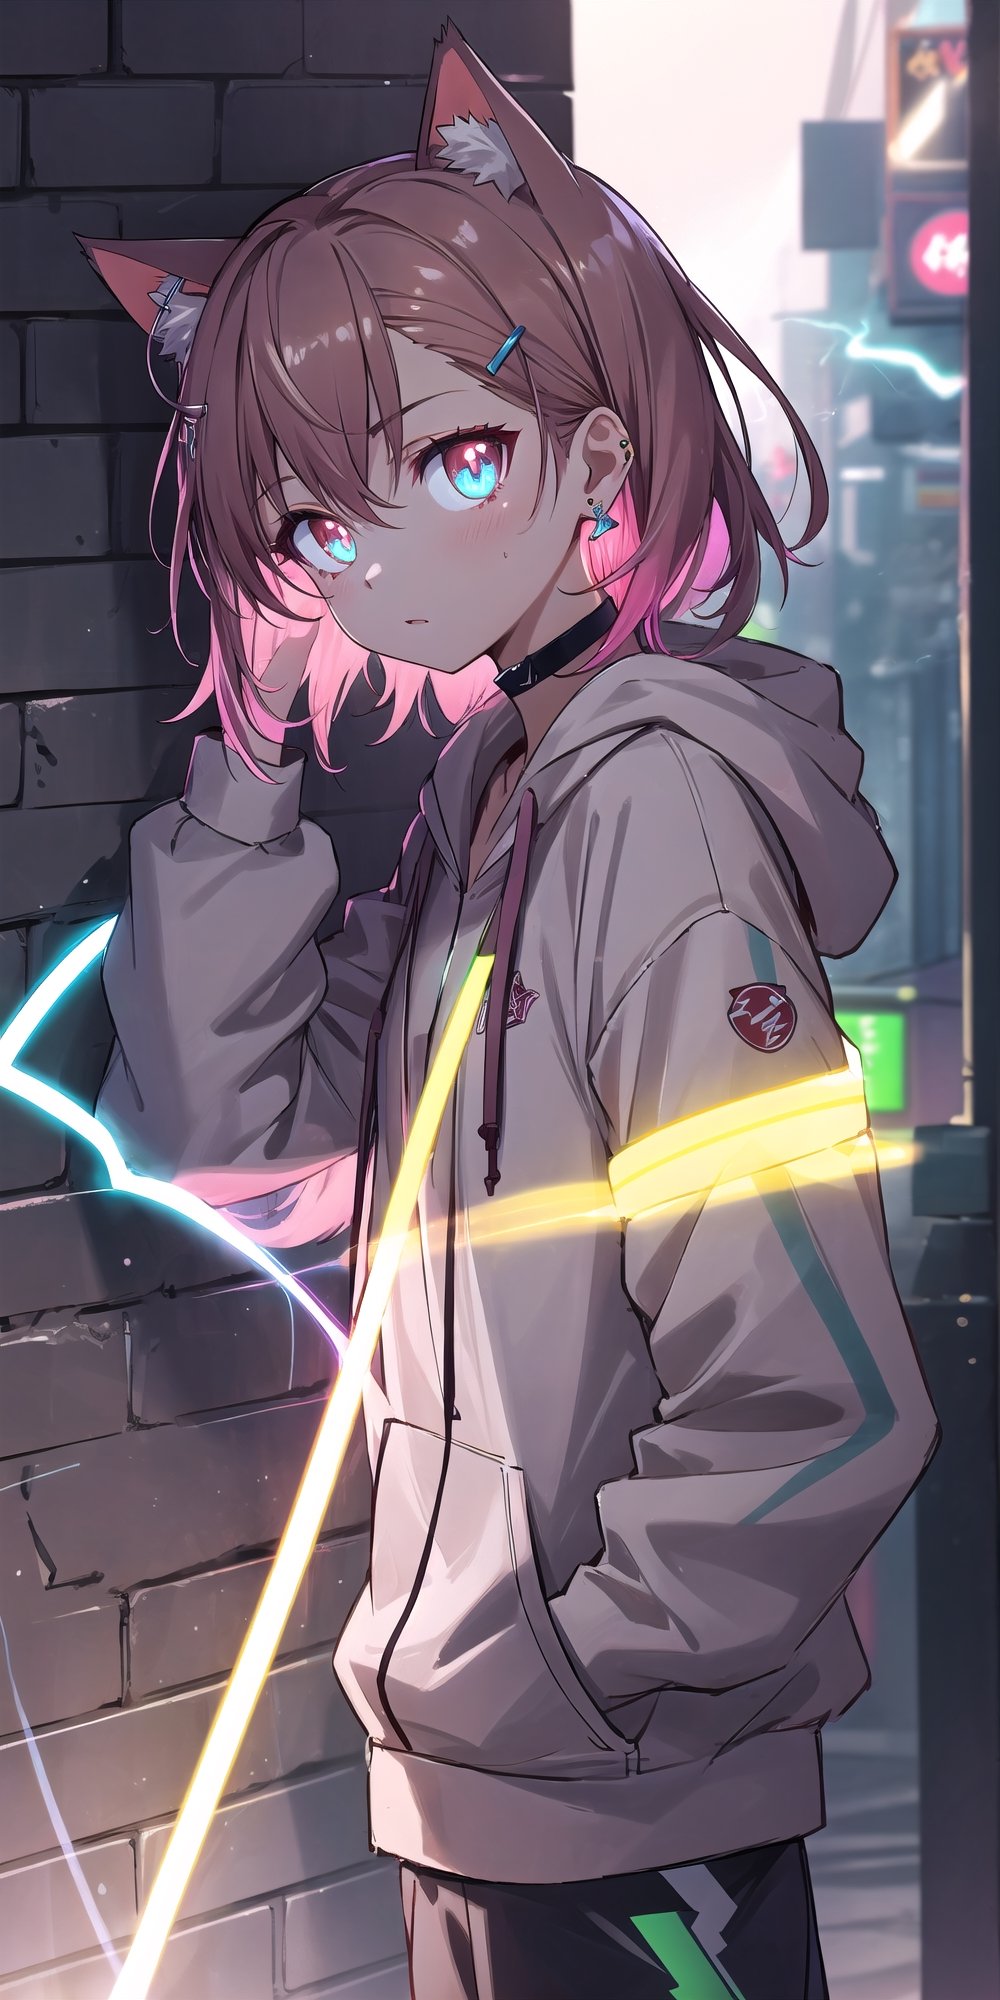 masterpiece, best quality, absurdres, perfect anatomy, 1girl, solo, earrings, sharp eyes, choker, neon shirt, open jacket, turtleneck sweater, night, against wall, brick wall, graffiti, dim lighting, alley, looking_to_side, cats ears,1girl hairclip,Neon Light, blushing, glowing eyes, neon eyes, neon clothes, glow_in_the_dark, hoodie, hooded, short_pants, black clothes, hand_in_pocket, tsunderia, hooding, arrgant, has a Lightning power, lighting from hand, Lightning from her eyes,lighting eyes, don't looking at viewer, side_view